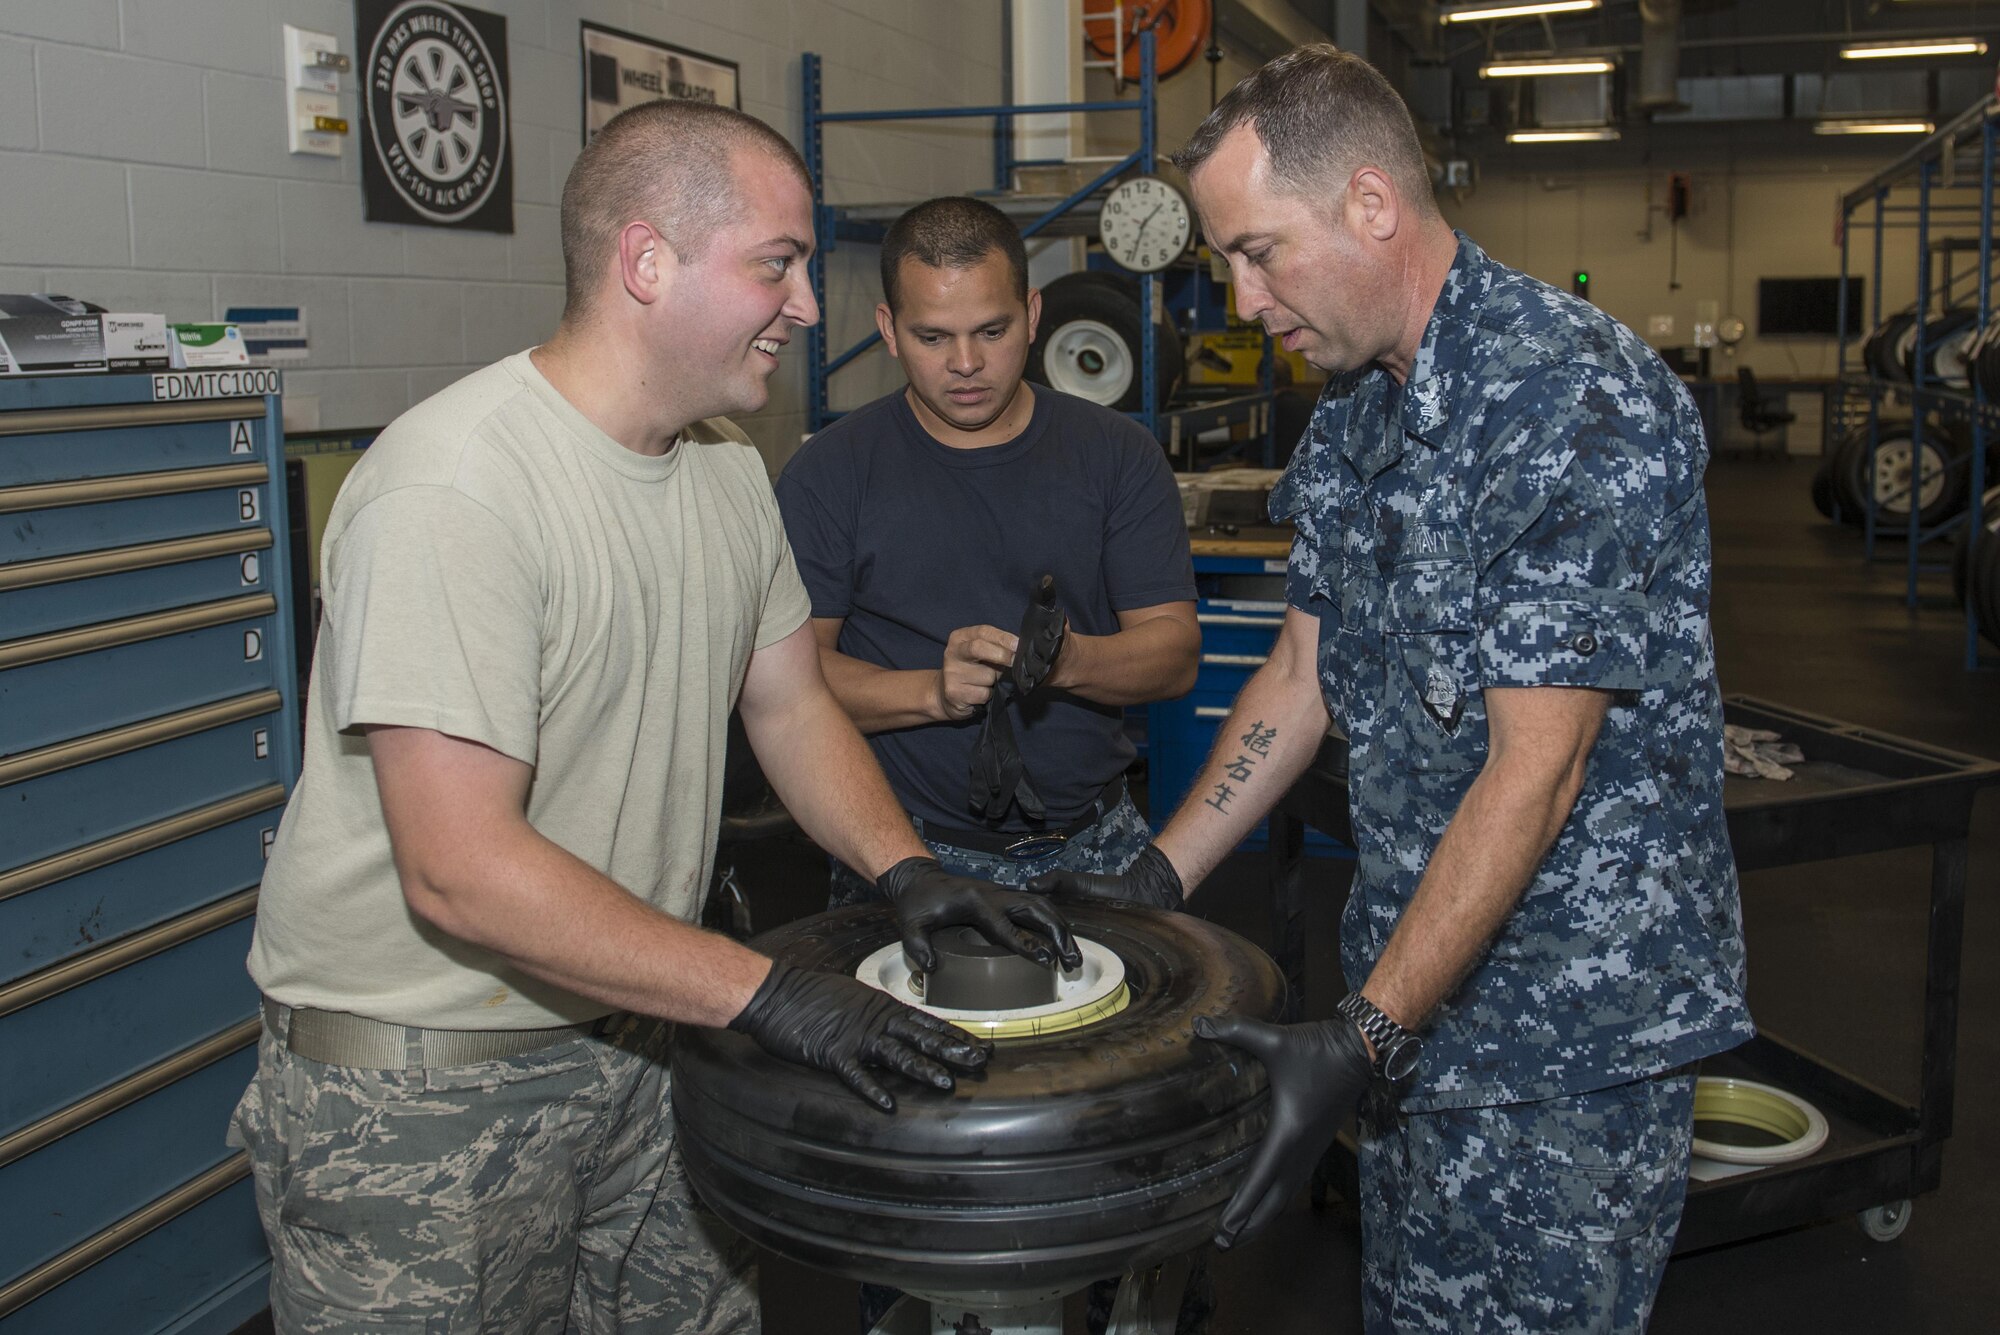 Staff Sgt. Mark Gower, 33rd Maintenance Squadron wheel and tire technician, Petty Officer 2nd Class Carlos Mazza, 33rd MXS aviation structural mechanic, and Petty Officer 1st Class Fredrick Logan 33rd MXS aviation structural mechanic, assemble an F-35 wheel June 9, 2016, at Eglin Air Force Base, Fla. The F-35 Wheel and Tire Shop at Eglin AFB is the only wheel and tire shop in the F-35 program that is integrated with both Air Force and Navy personnel. (U.S. Air Force photo by Senior Airman Stormy Archer/Released)